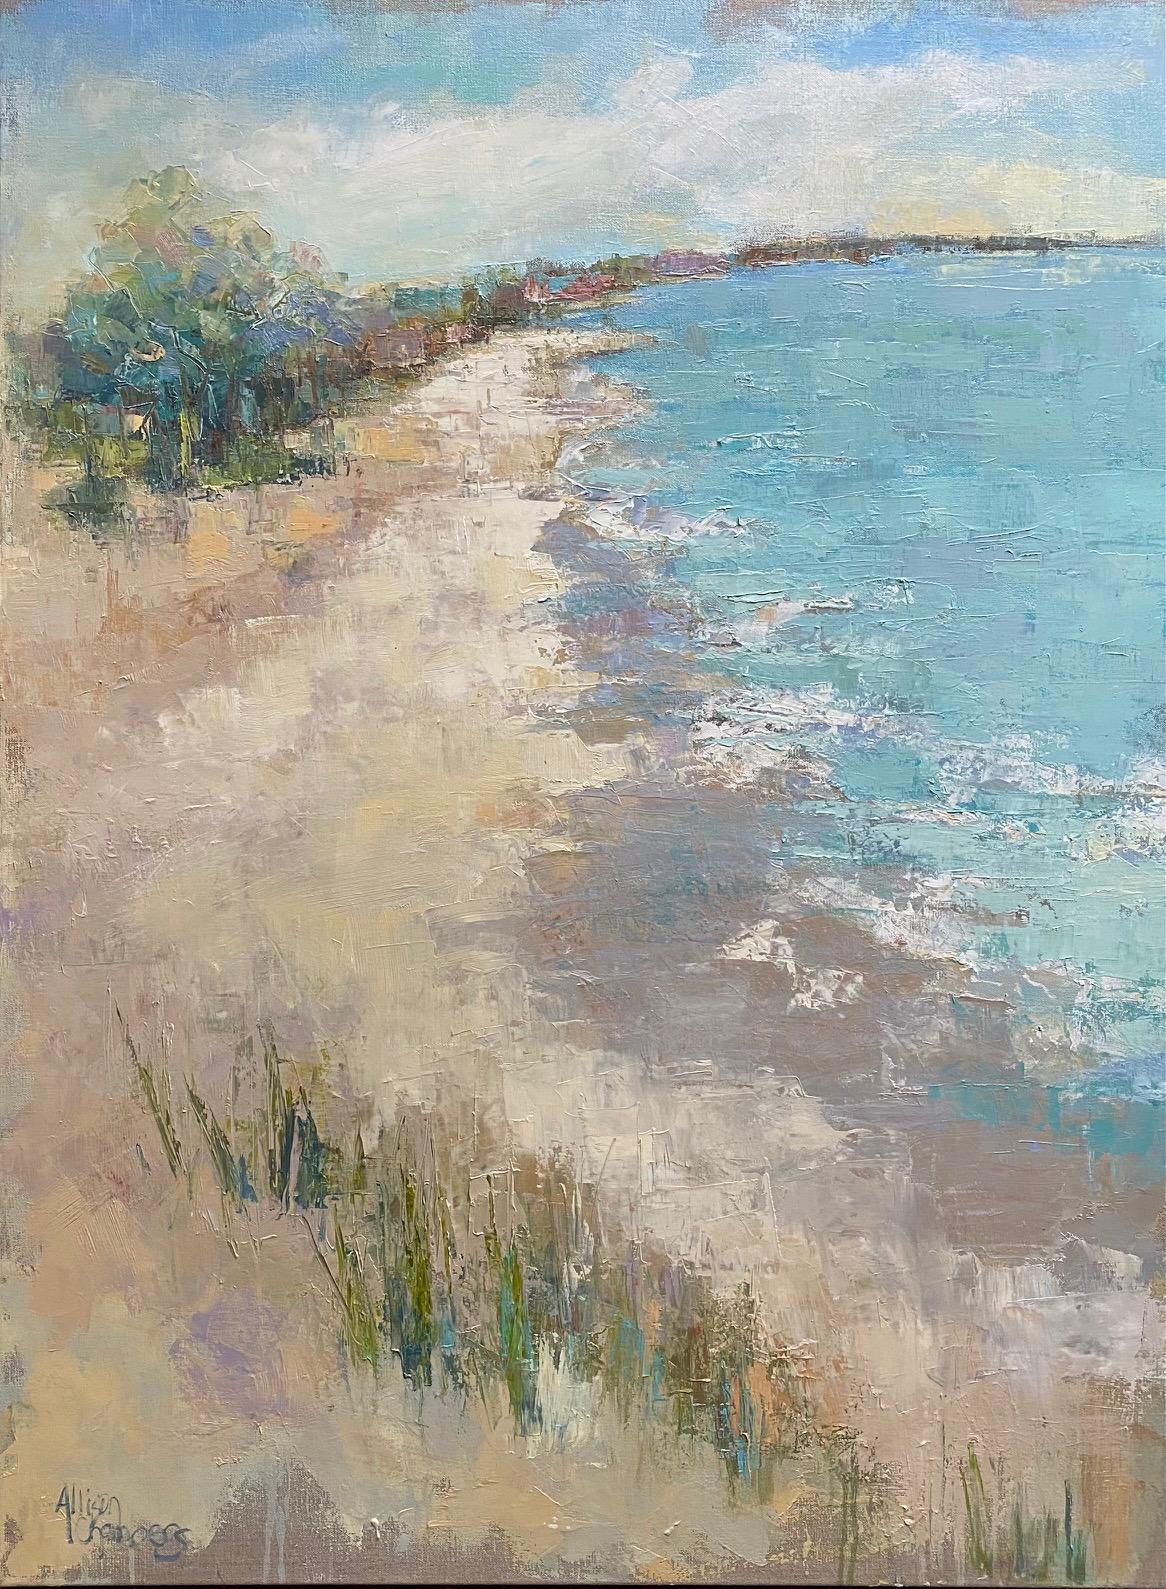 Coastal Walk, original 40x30 abstract expressionist marine landscape - Painting by Allison Chambers